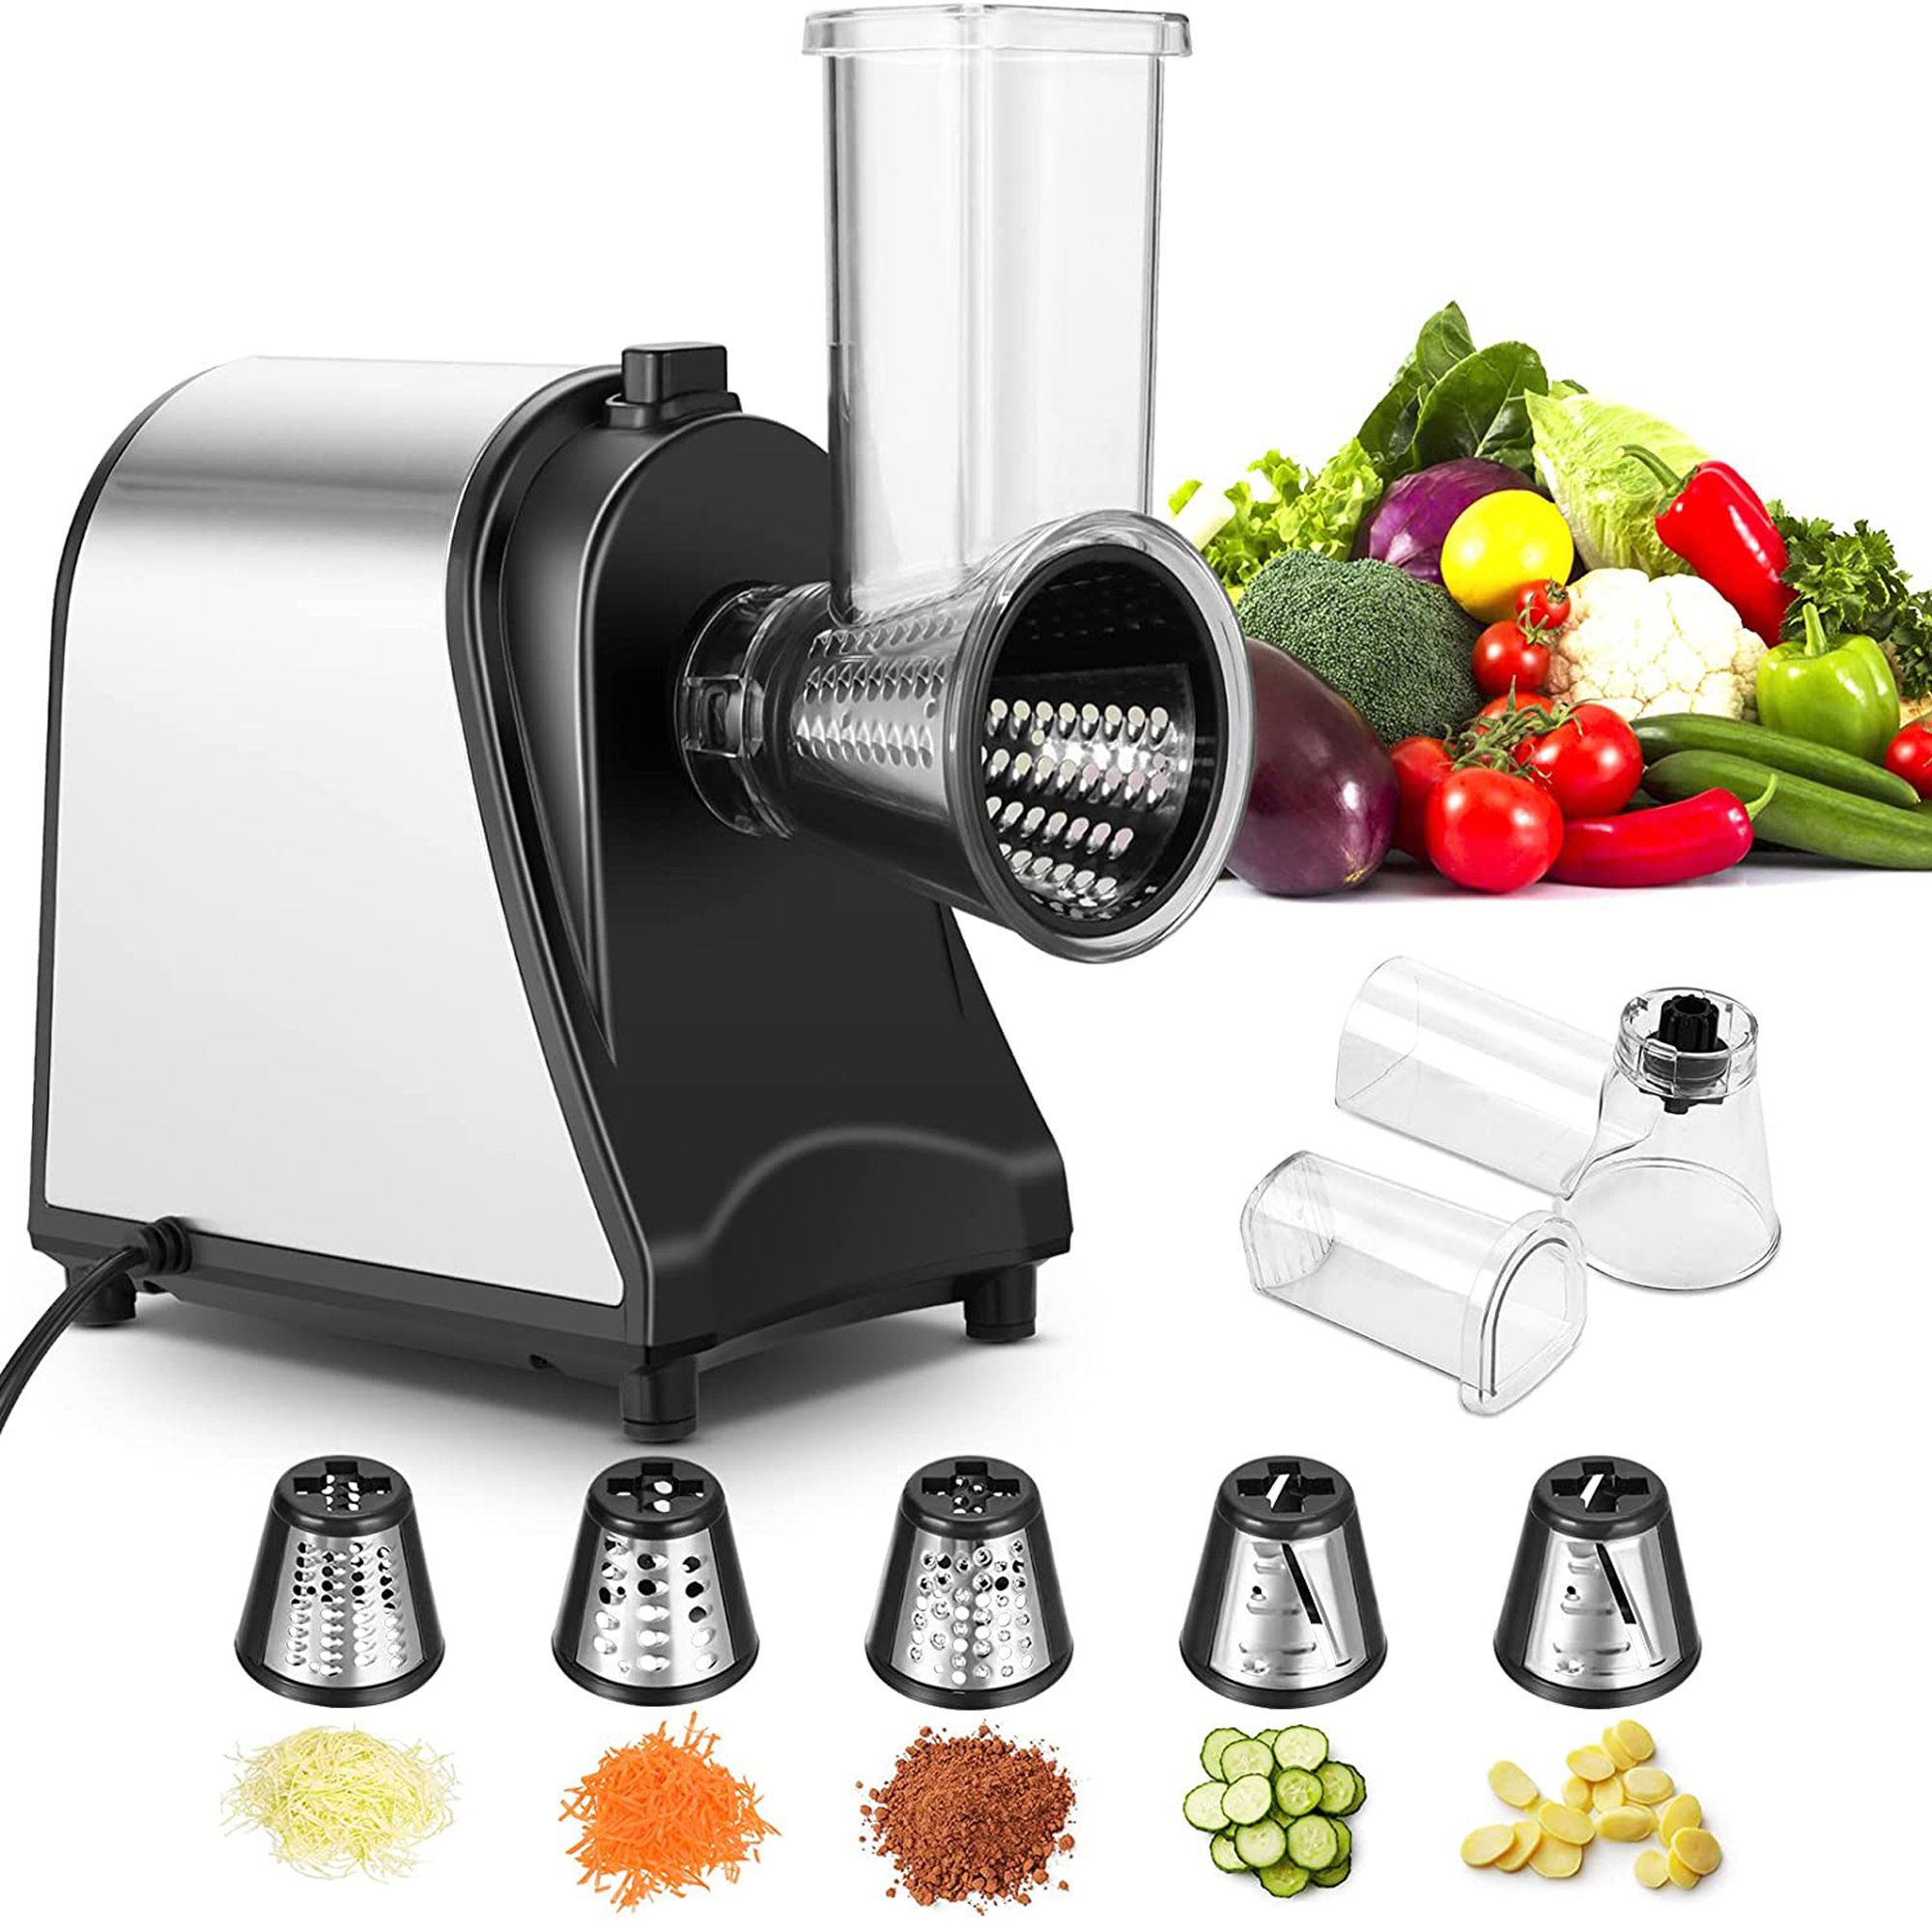 Himimi Electric Cheese Grater, Cutter, Slicer Shredder, 250W Salad